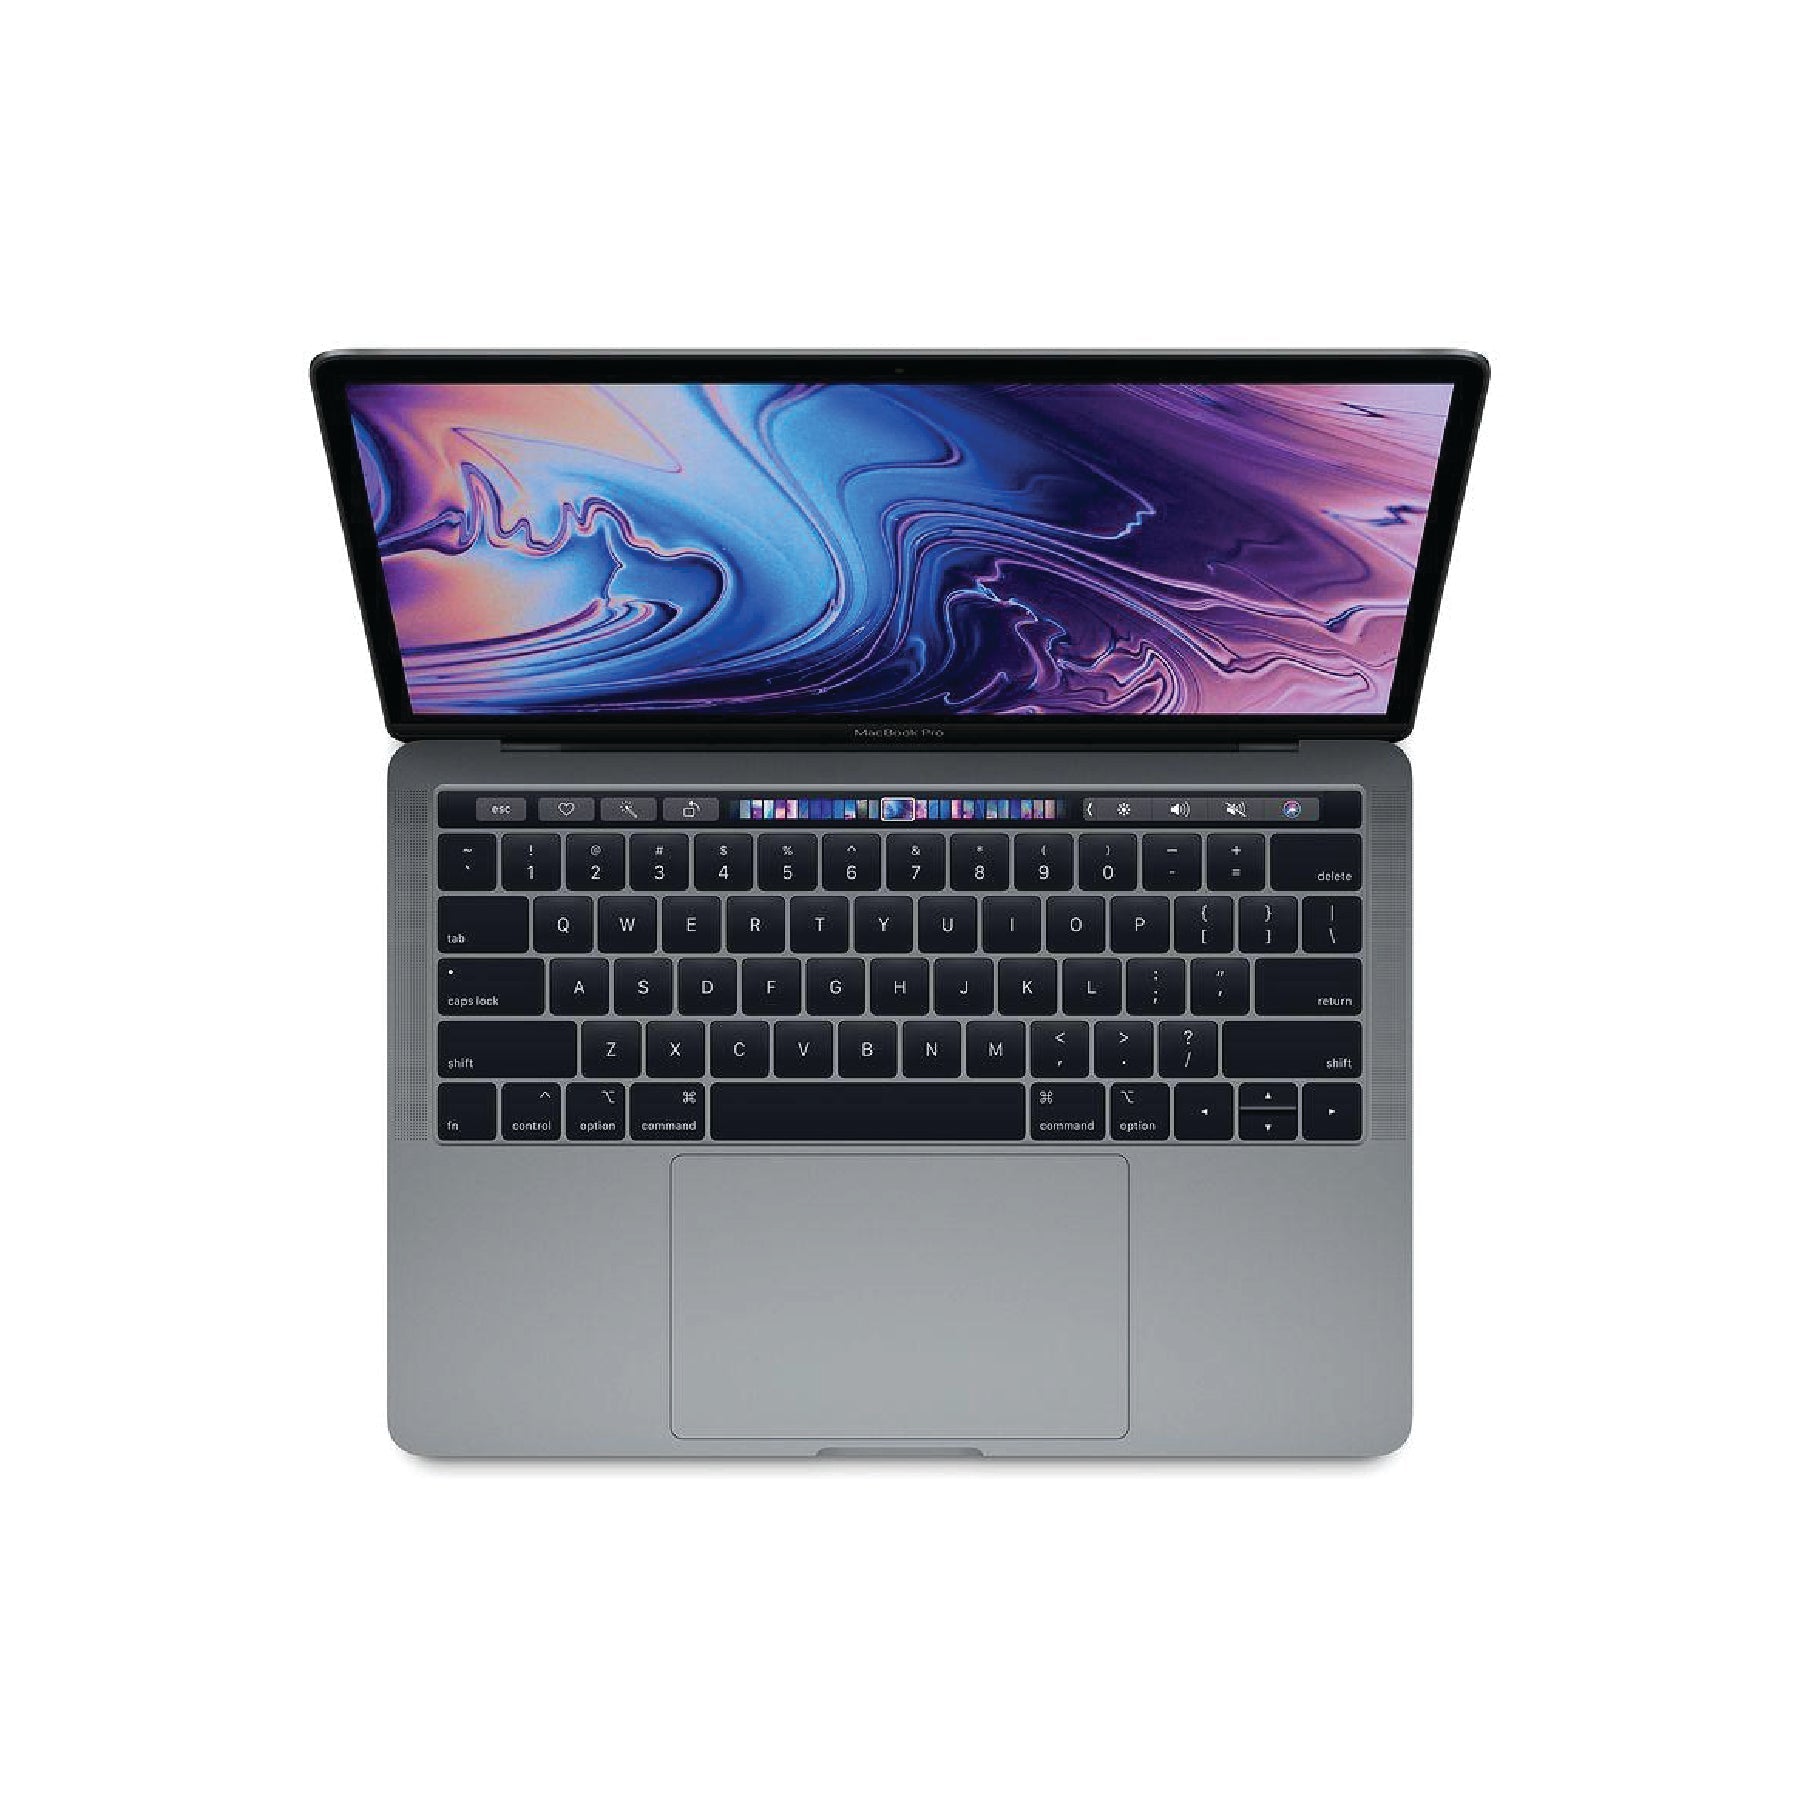 MacBook Pro (13-inch, 2017, Four Thunderbolt 3 ports) 3.1GHz, Intel Core i5 256GB - Space Grey (Good)